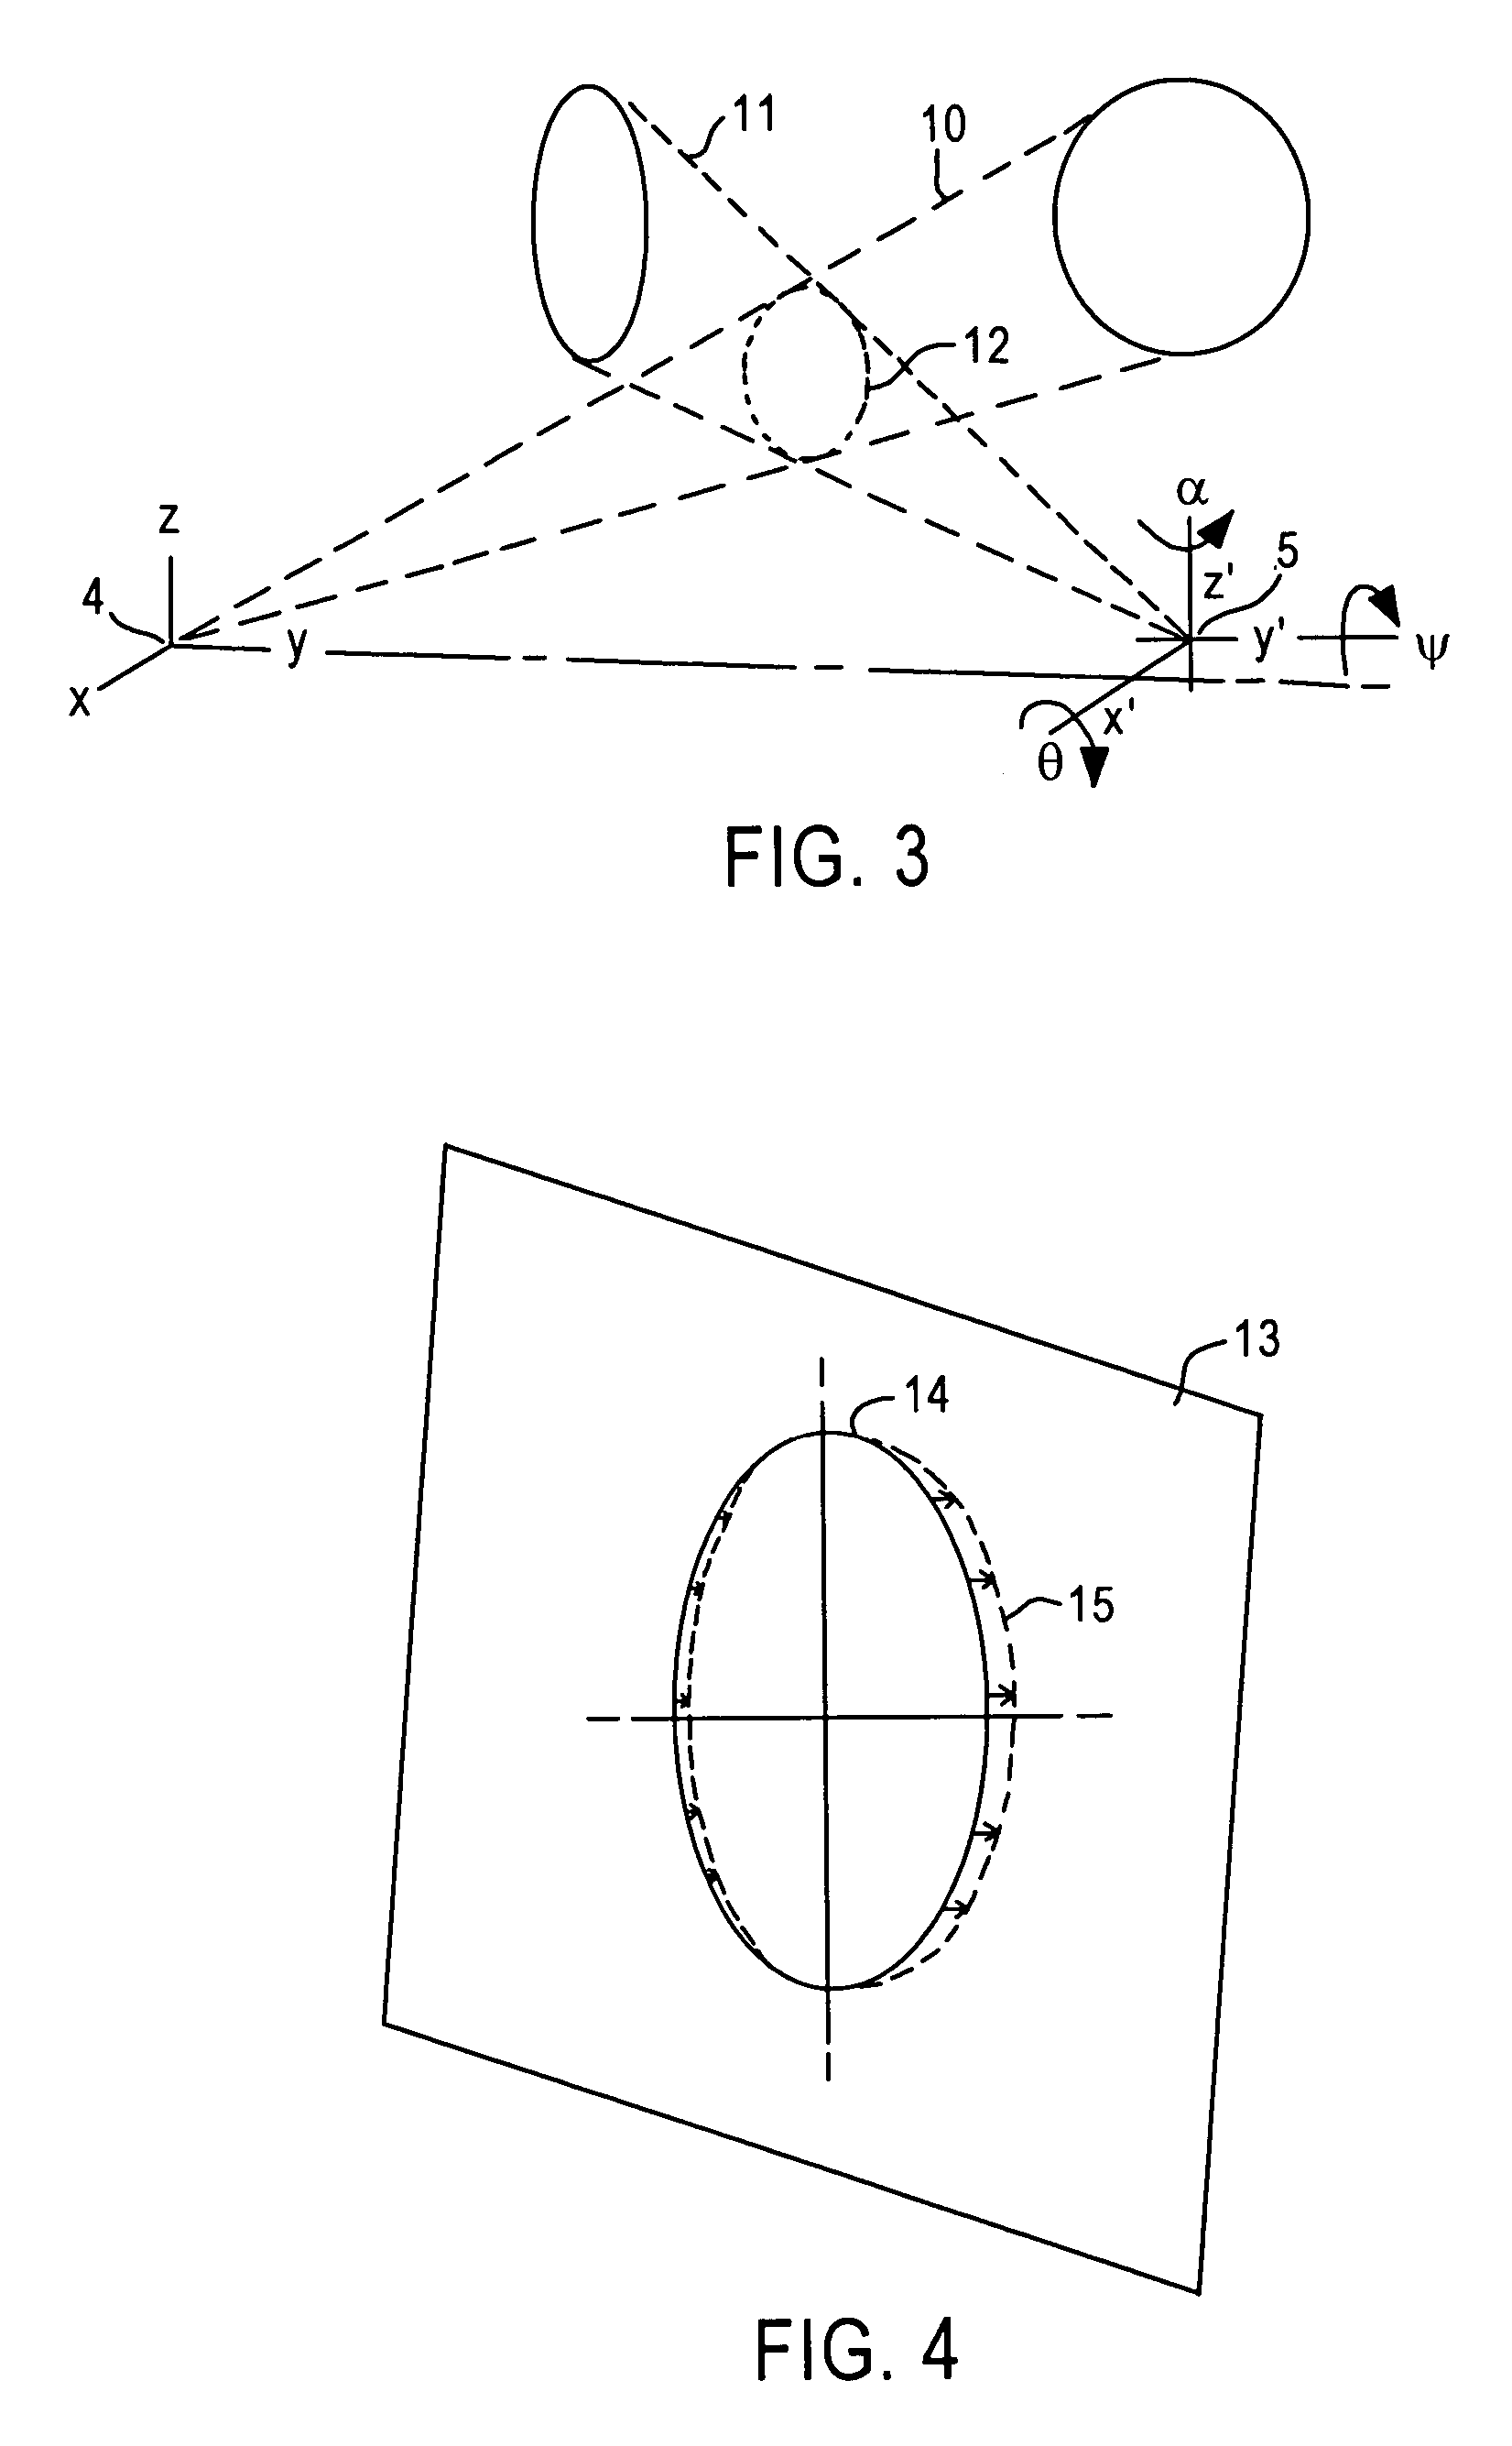 Non-contact vehicle measurement method and system